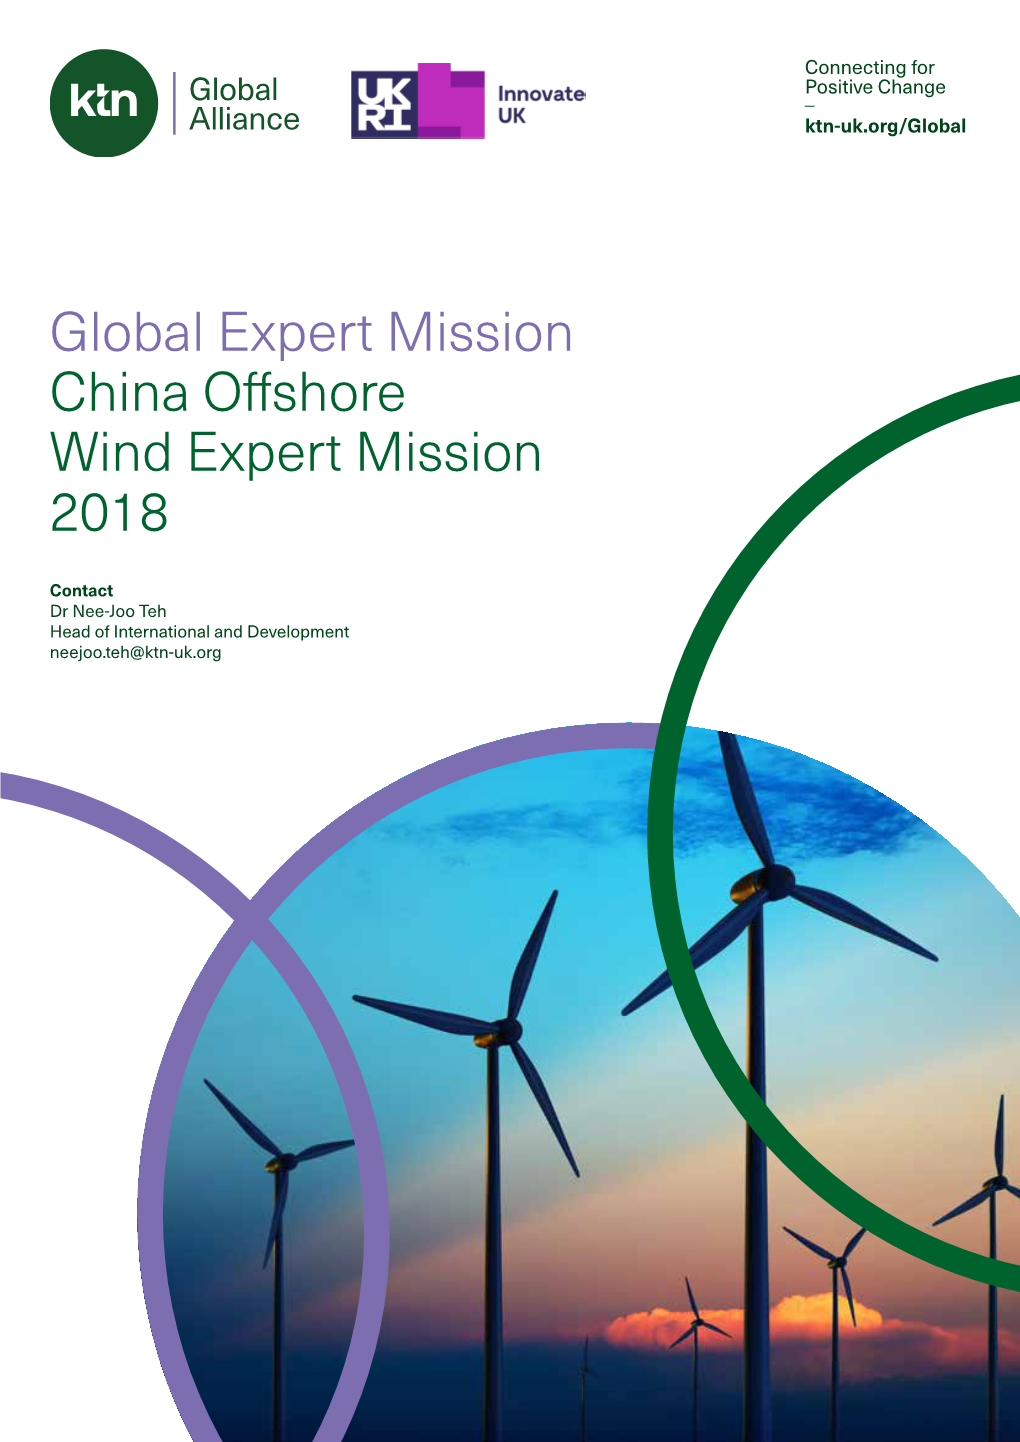 China Offshore Wind Expert Mission 2018